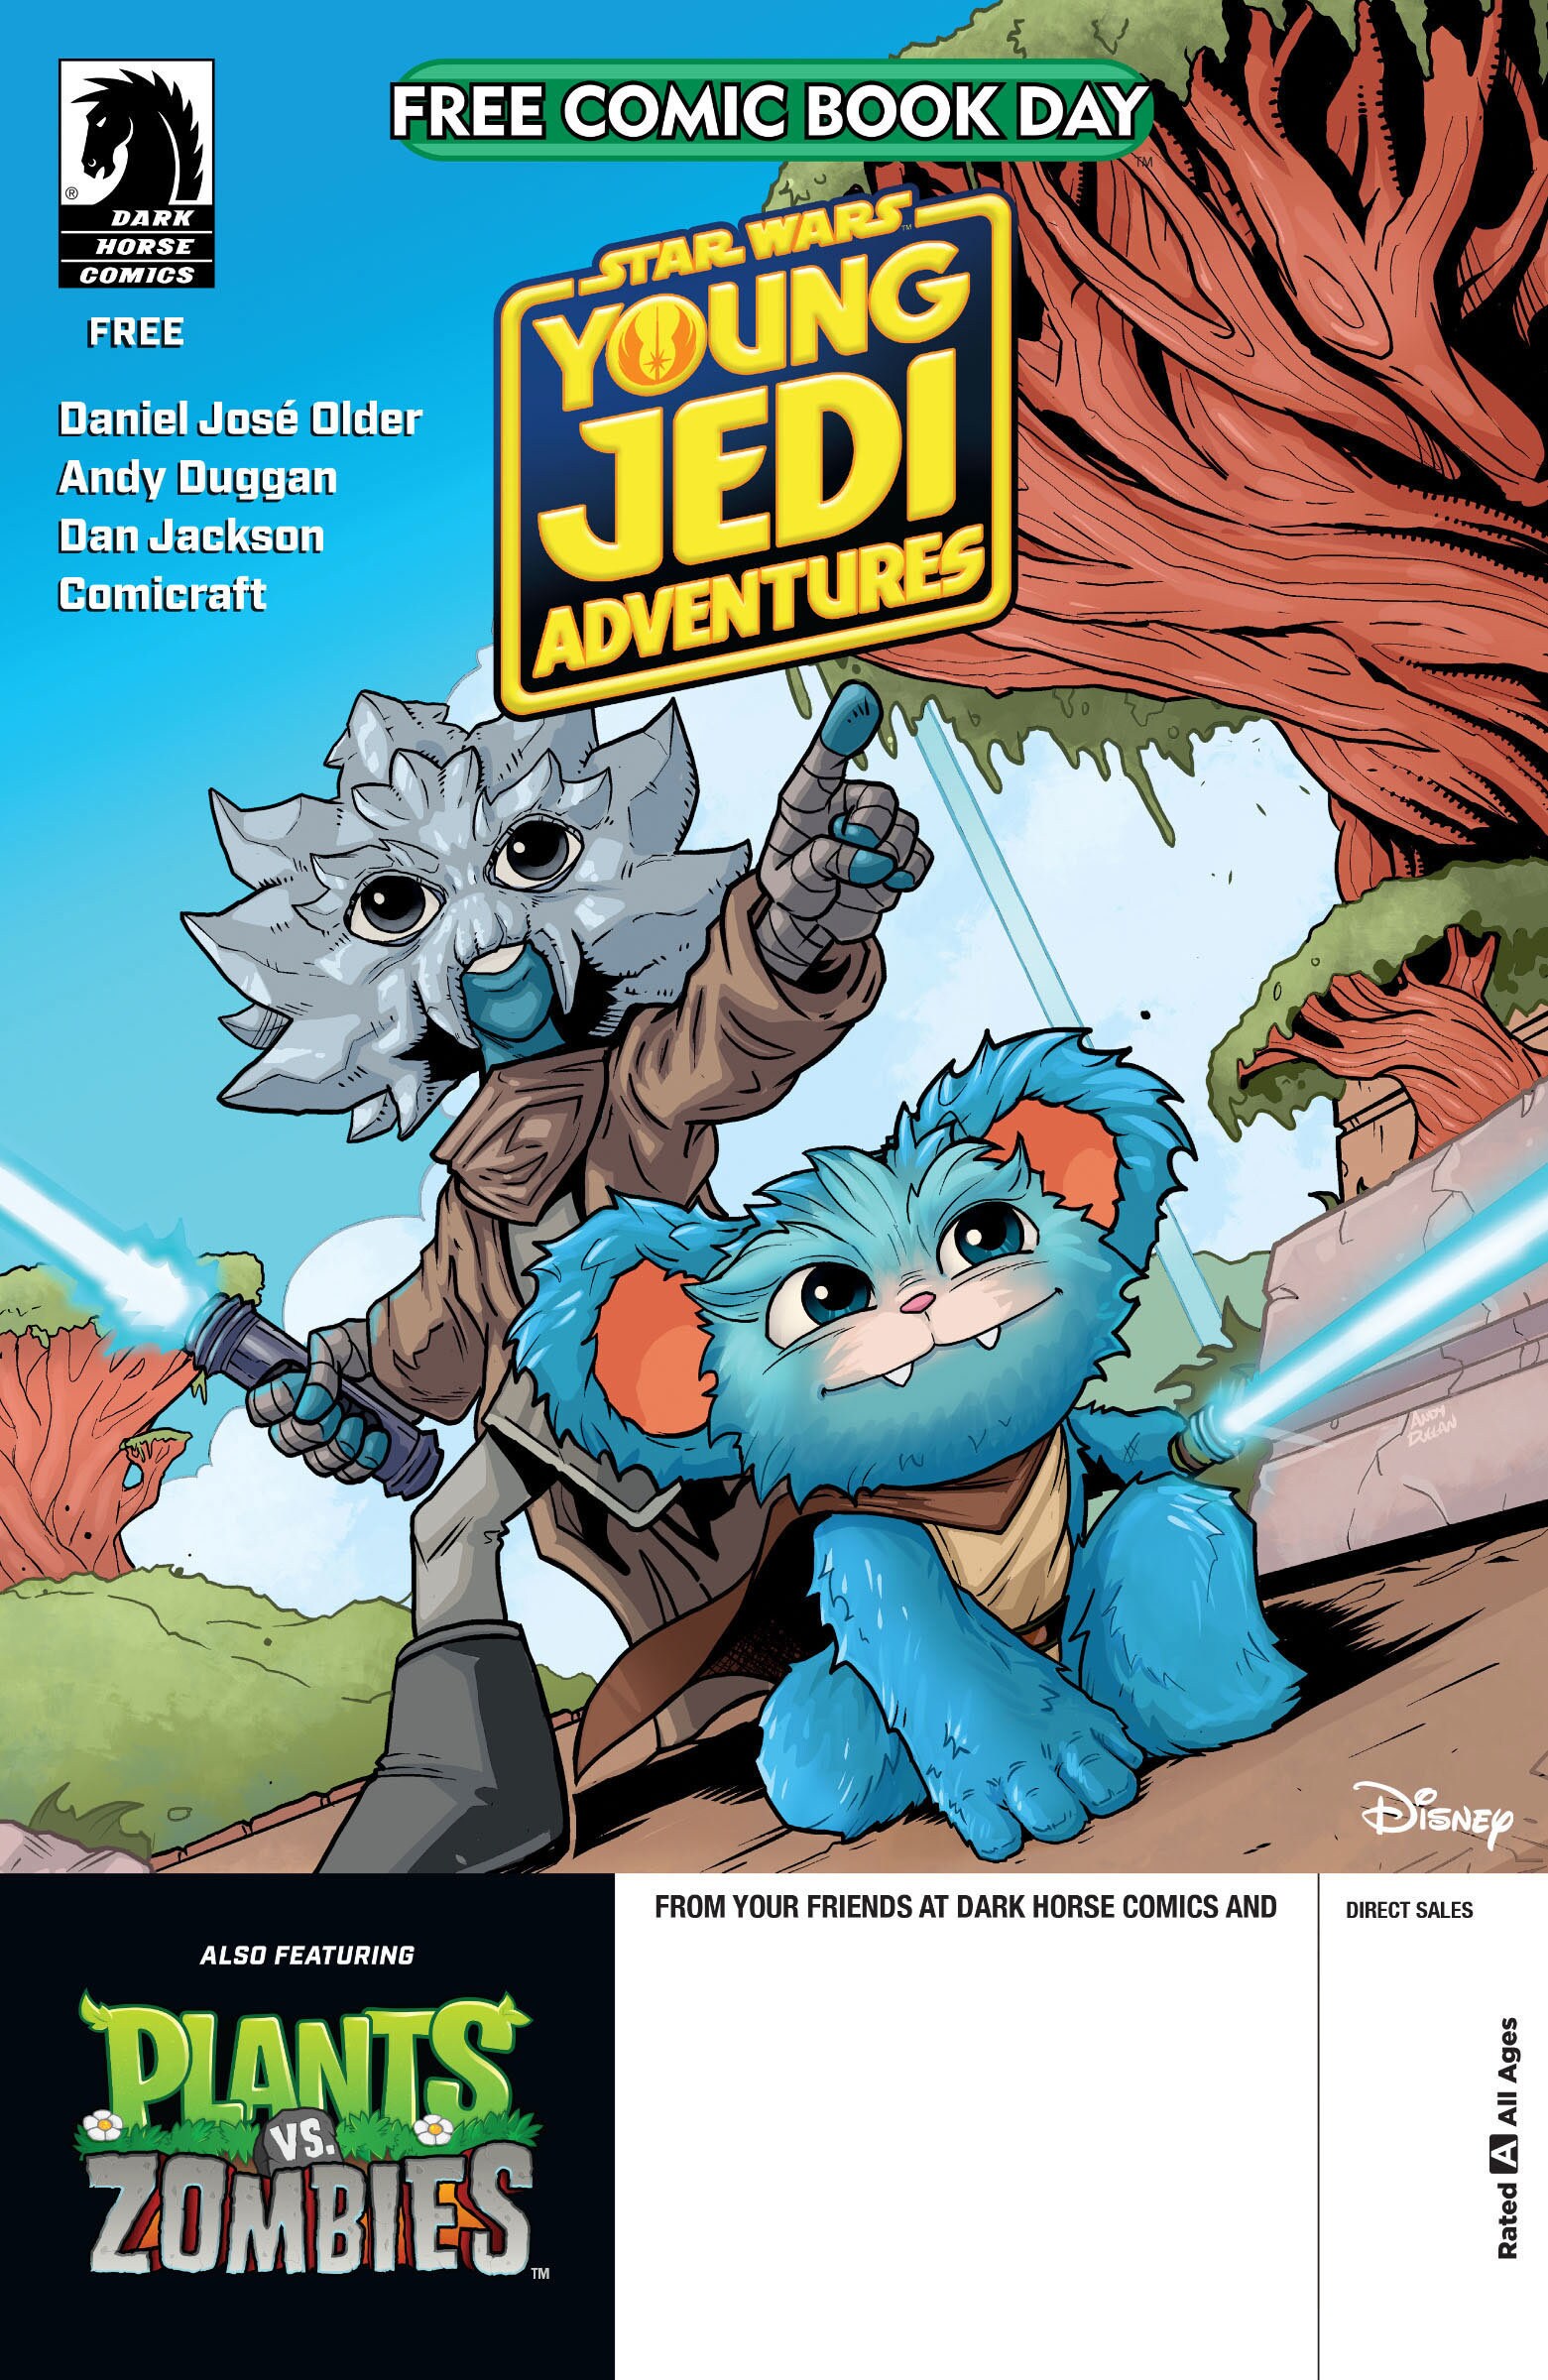 Star Wars: Young Jedi Adventures — Sky Parade Rescue cover